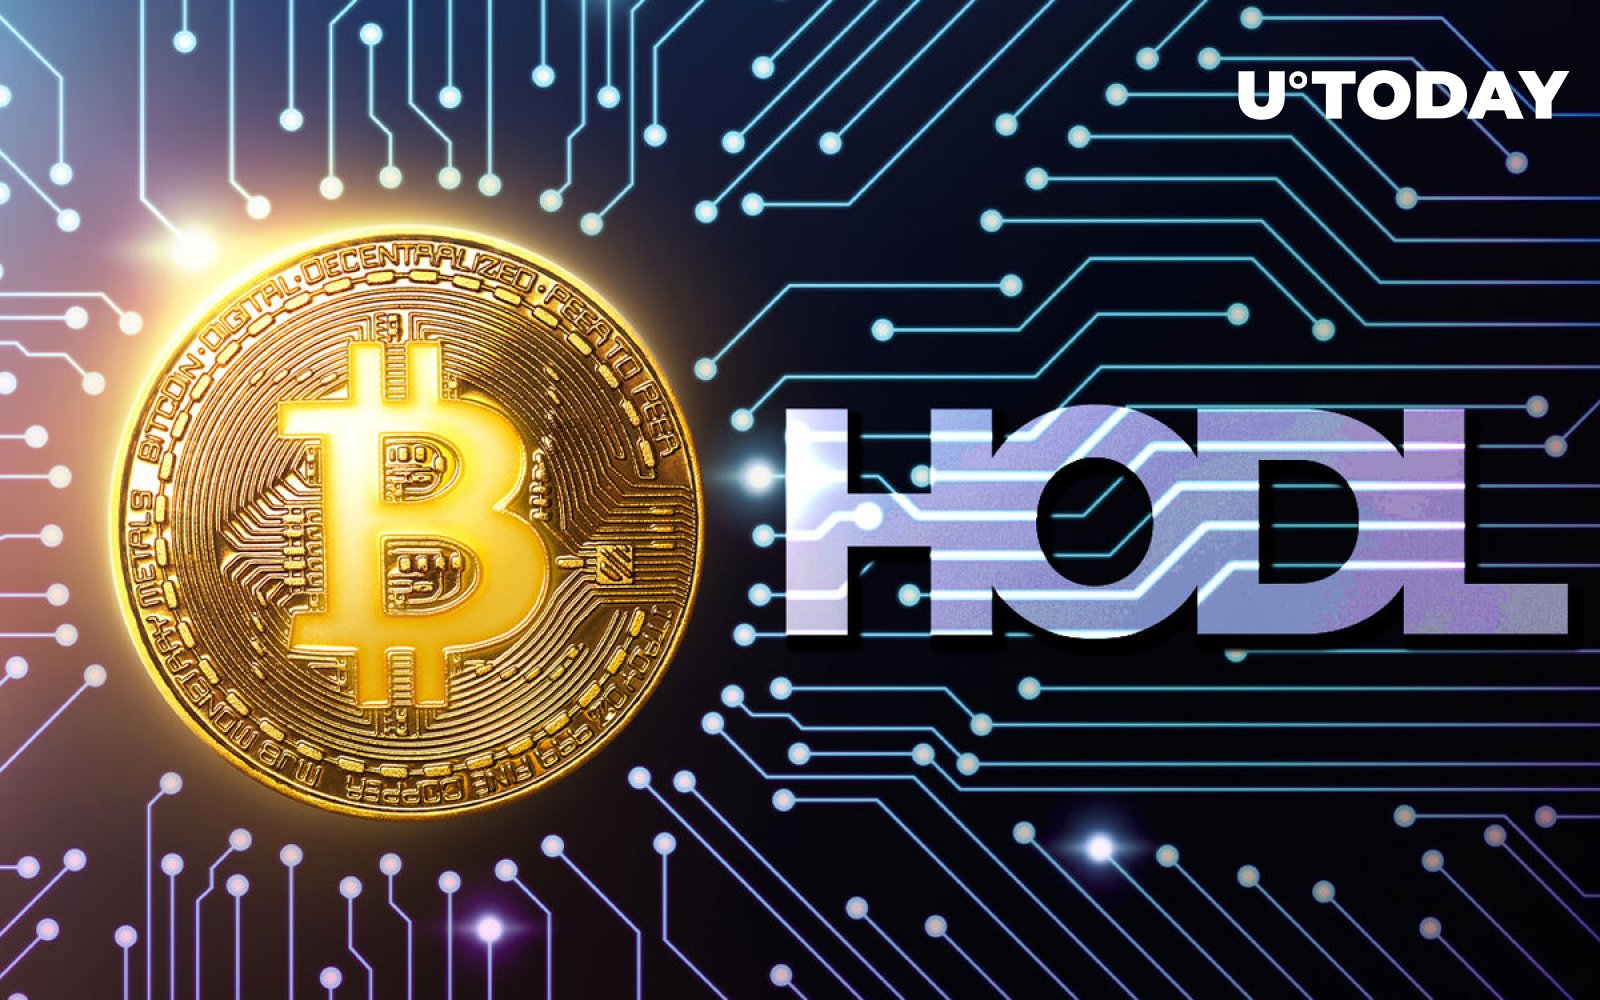 Major Bitcoin Miner Hut 8 Is Confident in HODL Strategy, While BTC Exchange Inflow Volume Reaches Monthly Low